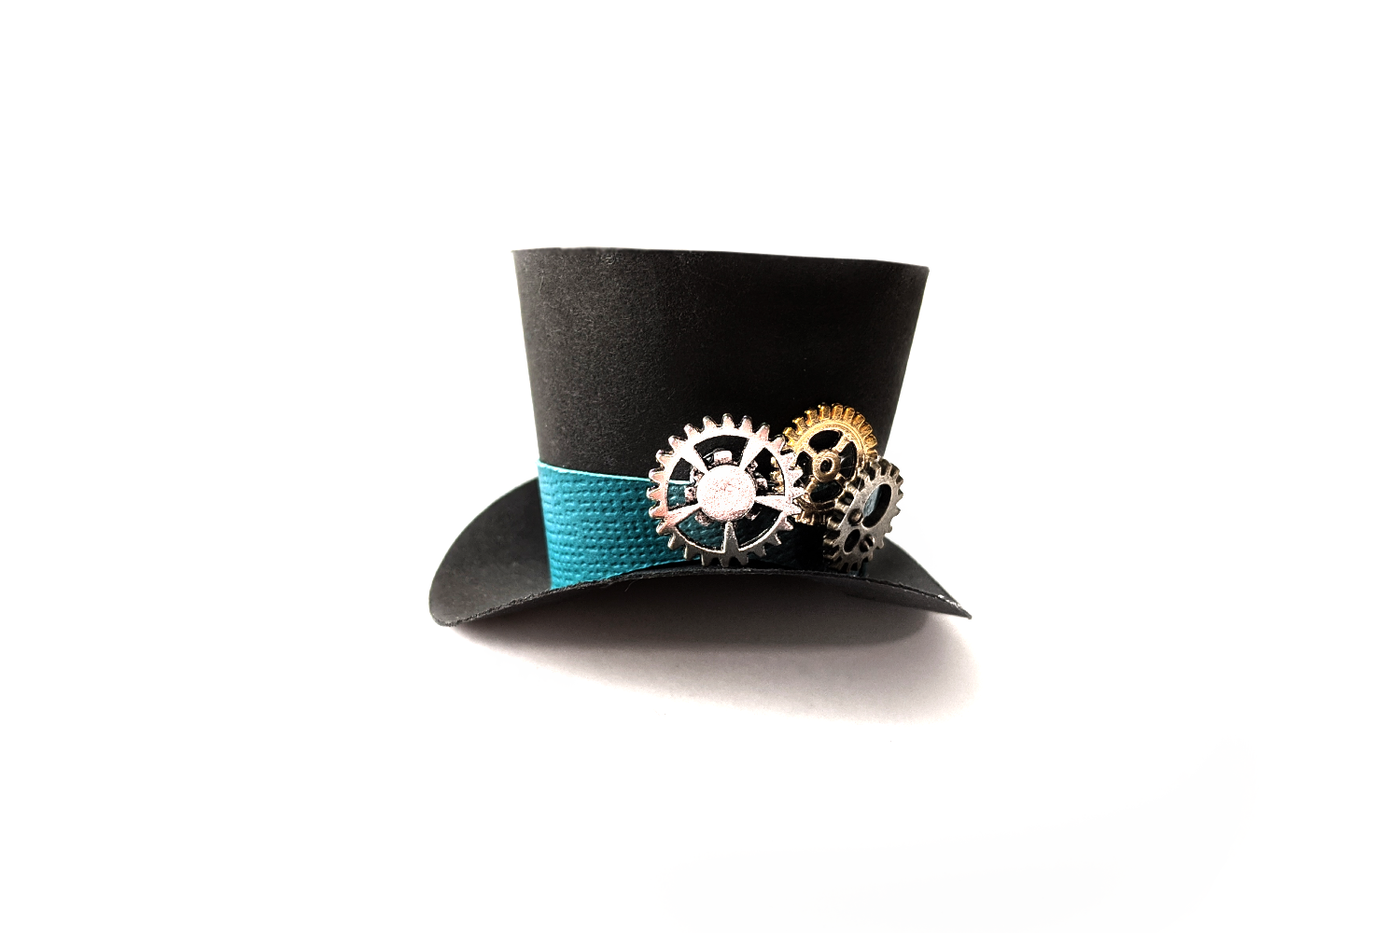 Mini top hat made out of paper, with steampunk gears added as embellishments